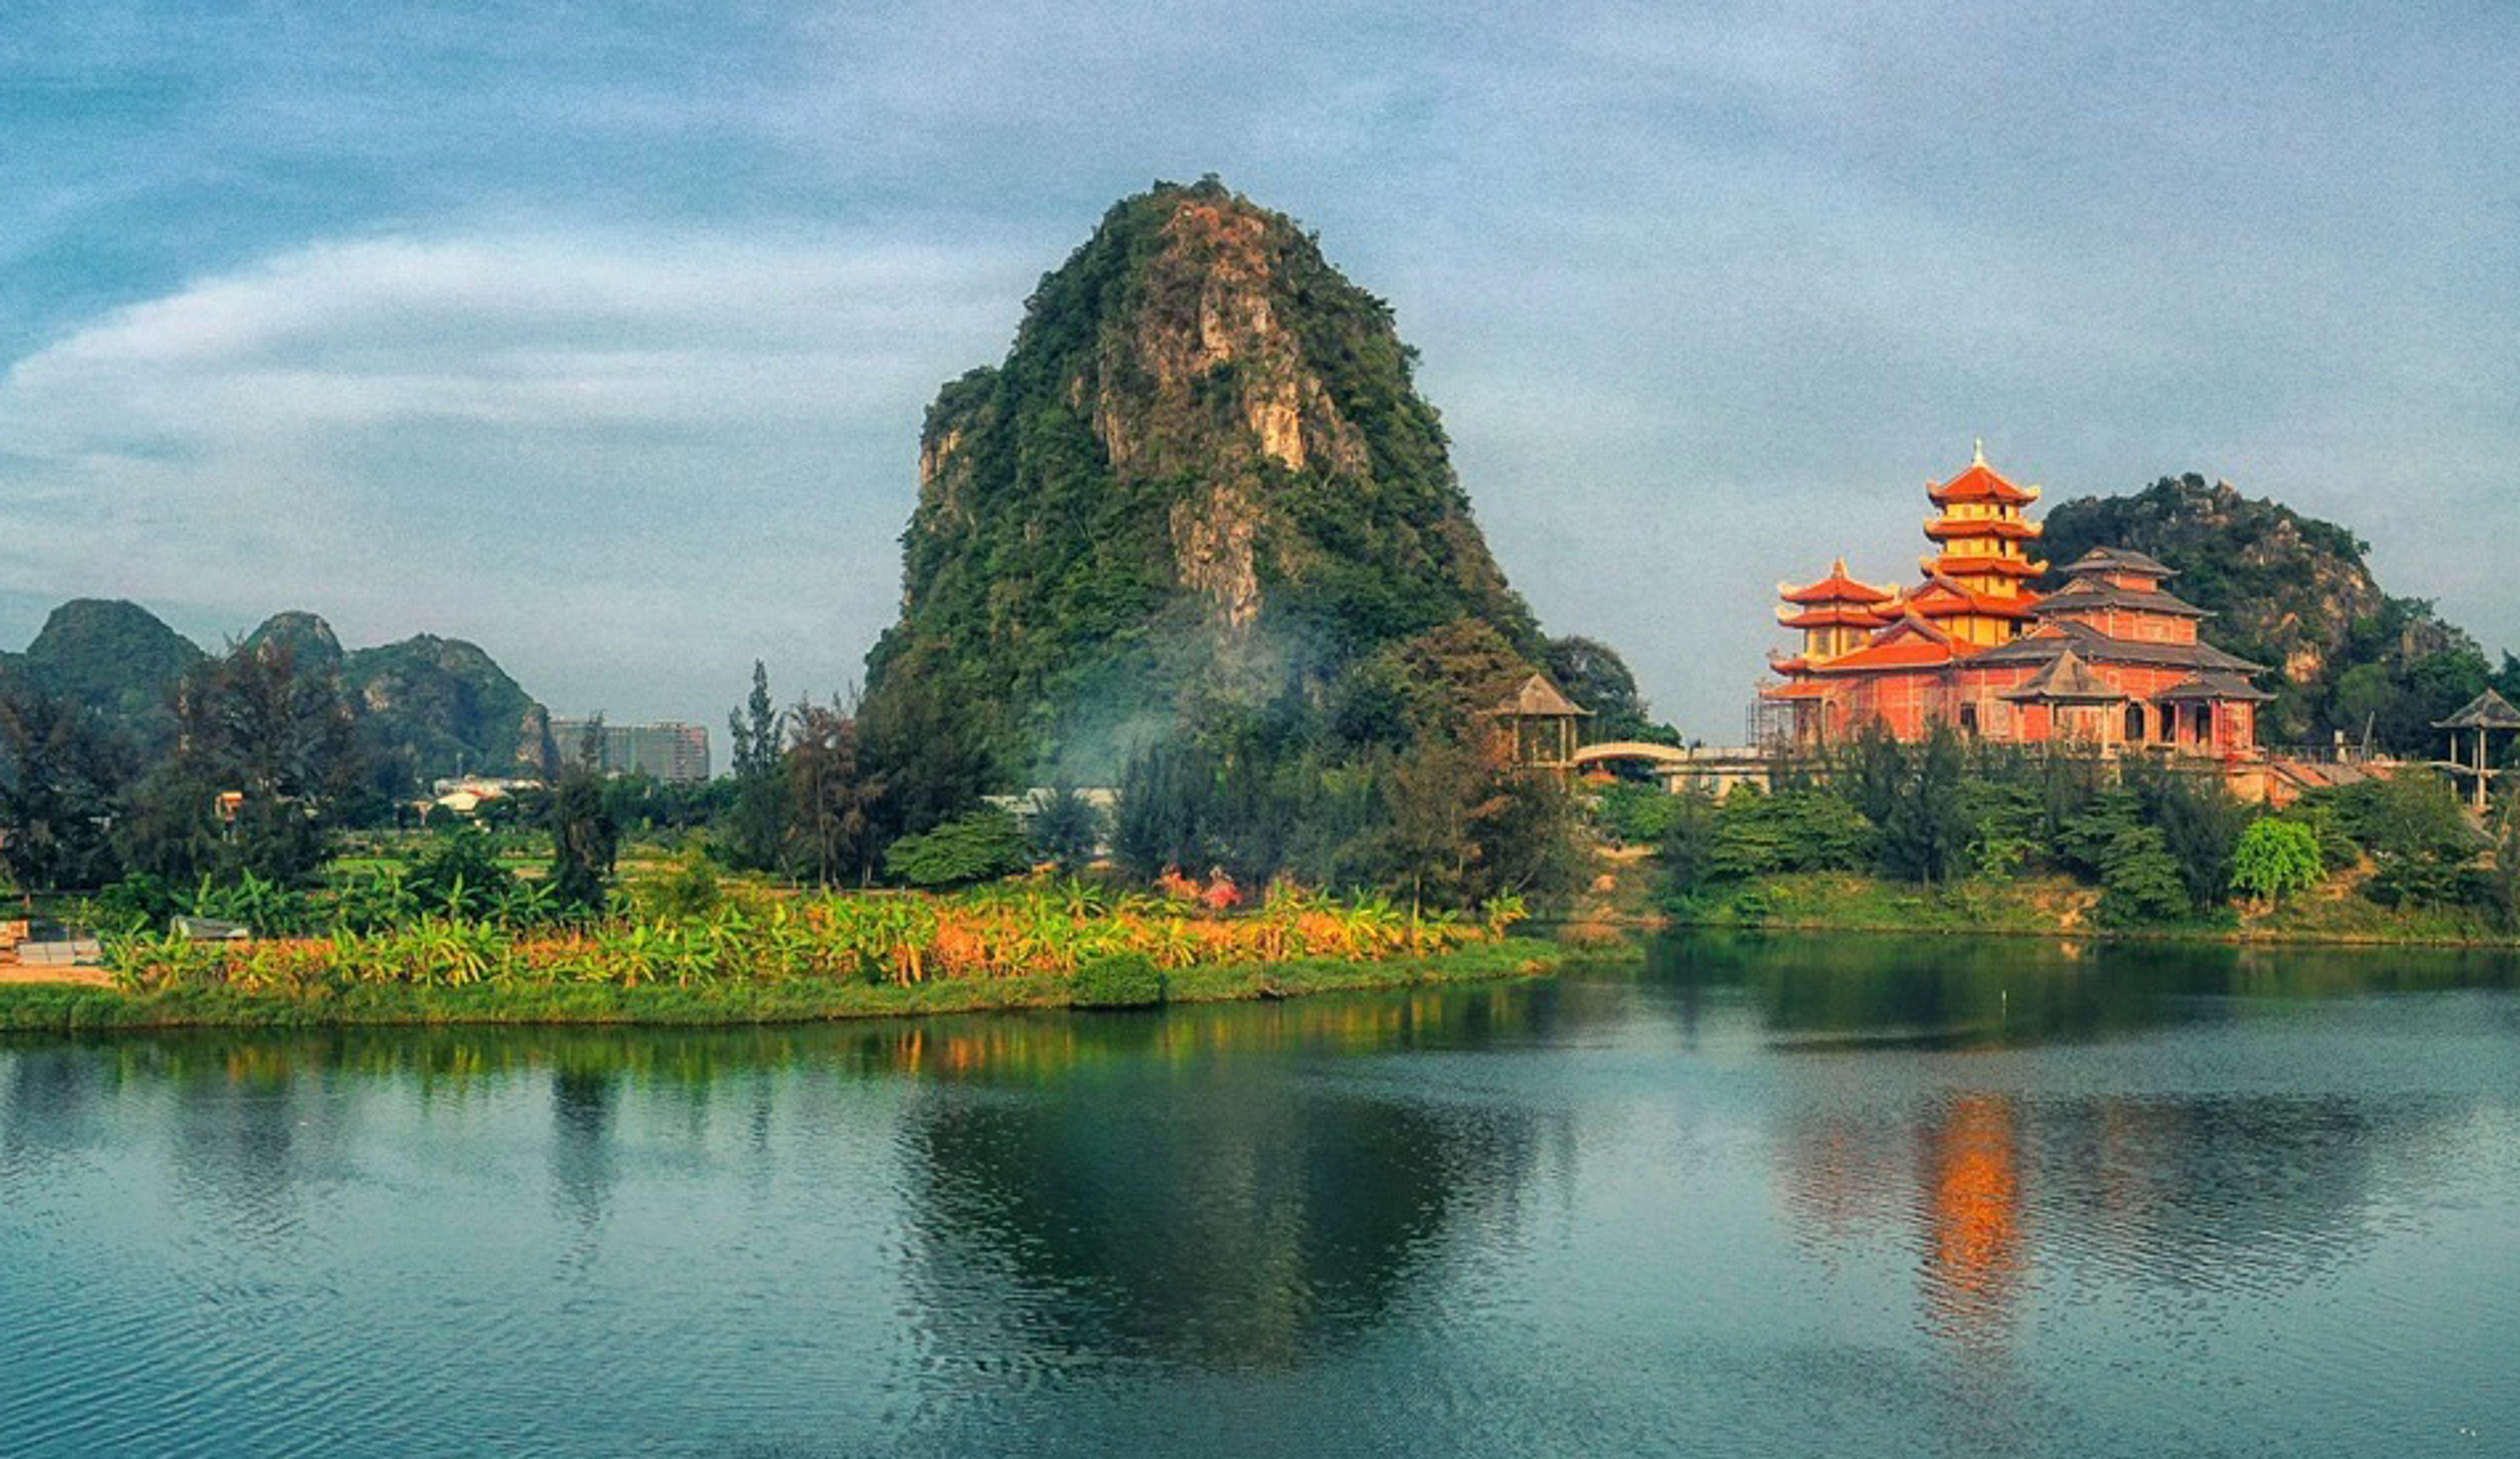 The beauty of the five elements mountains in Da Nang, Vietnam